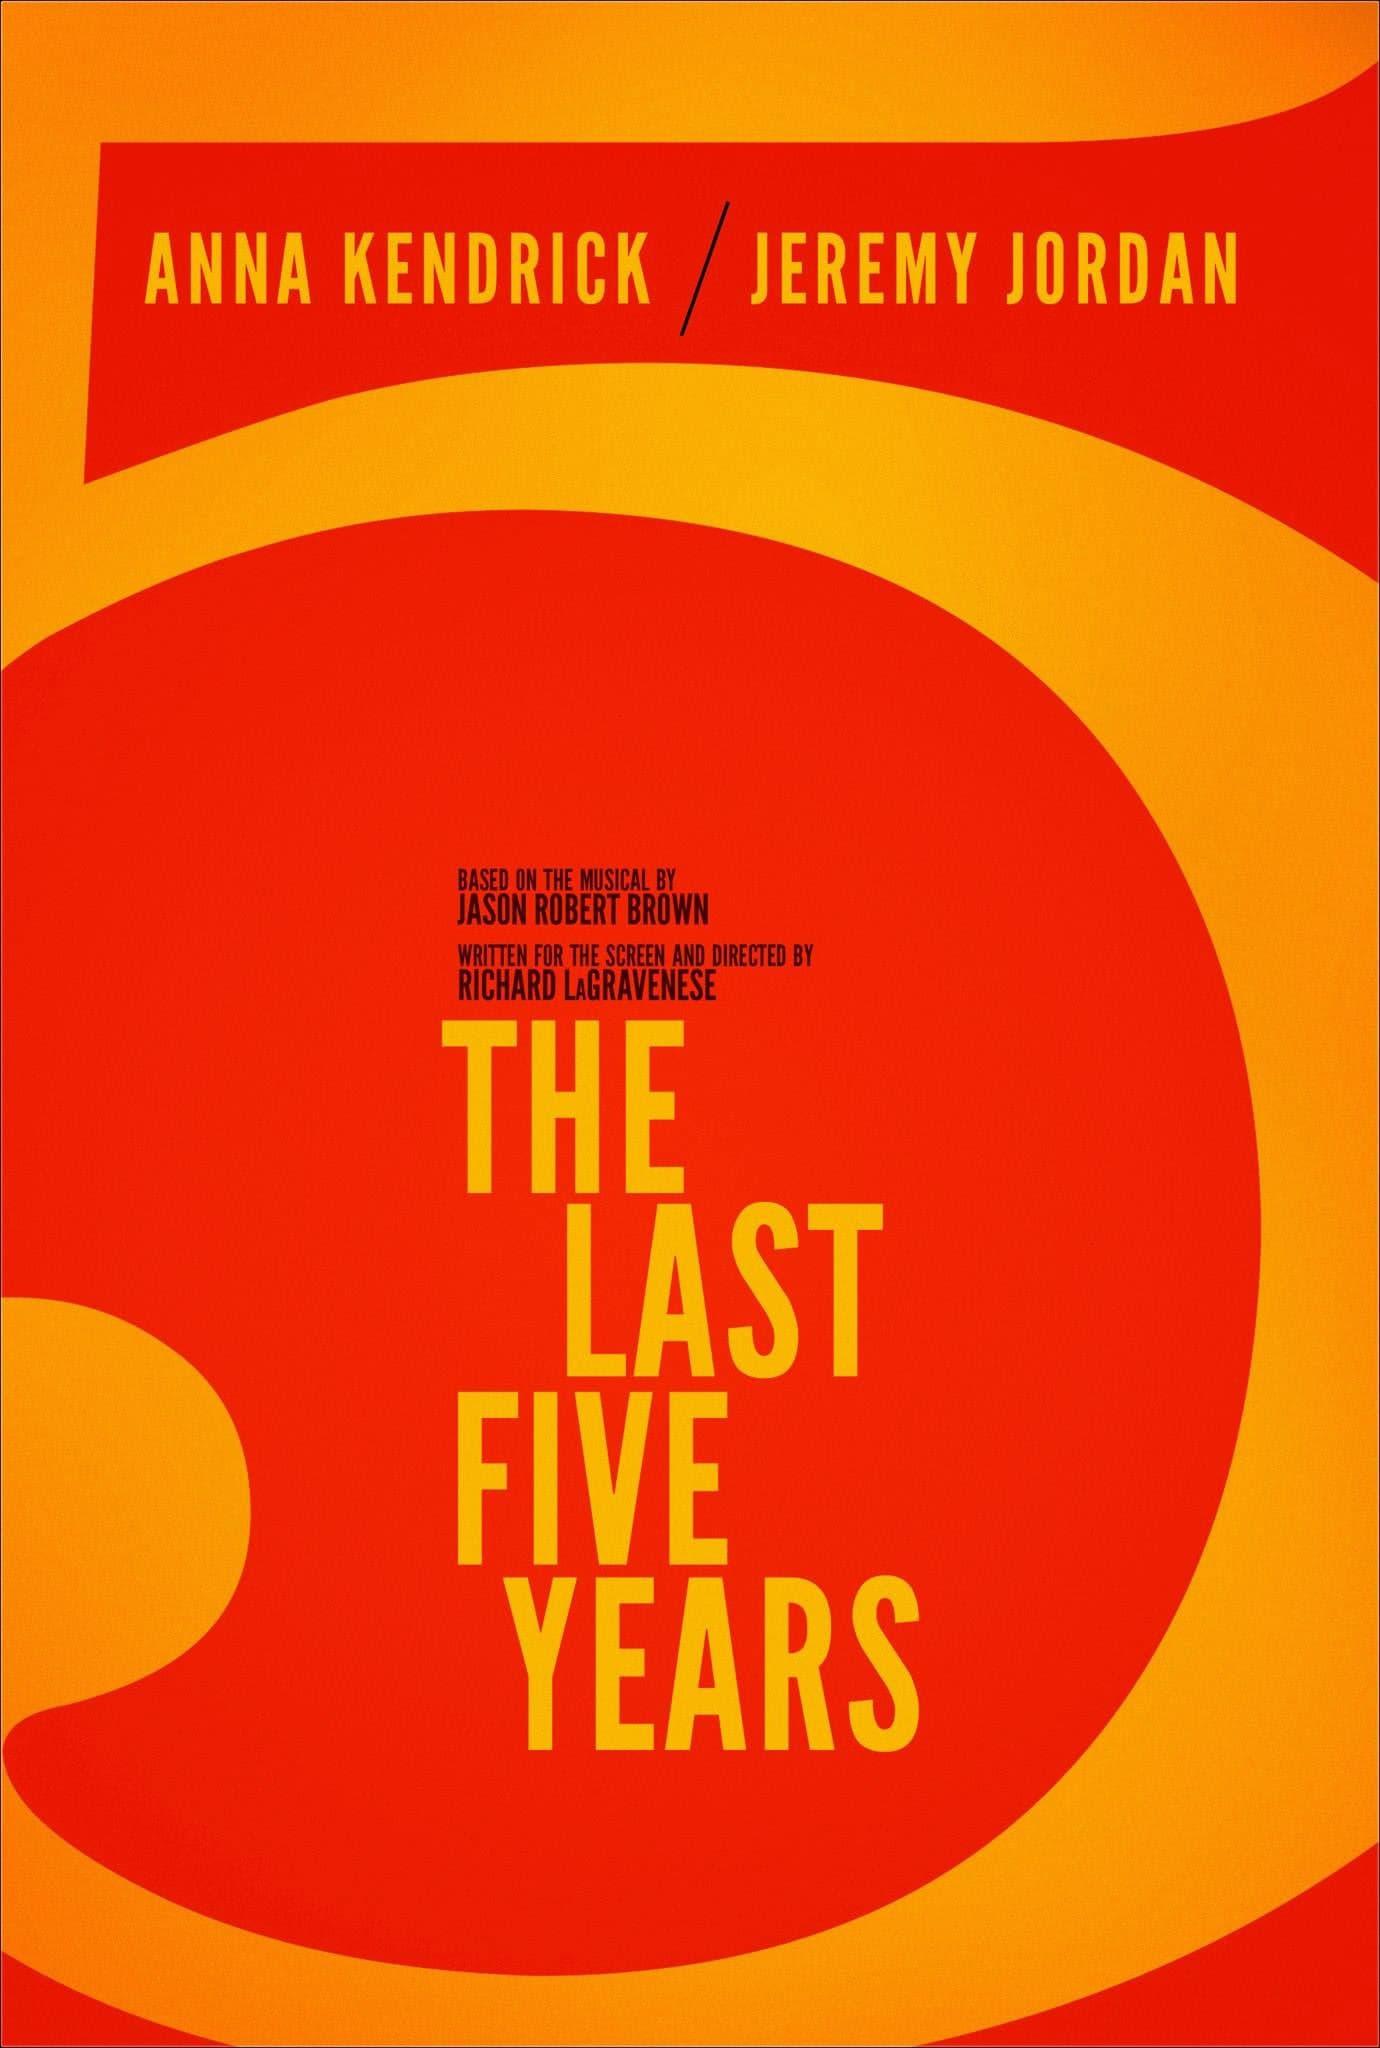 The Last Five Years poster